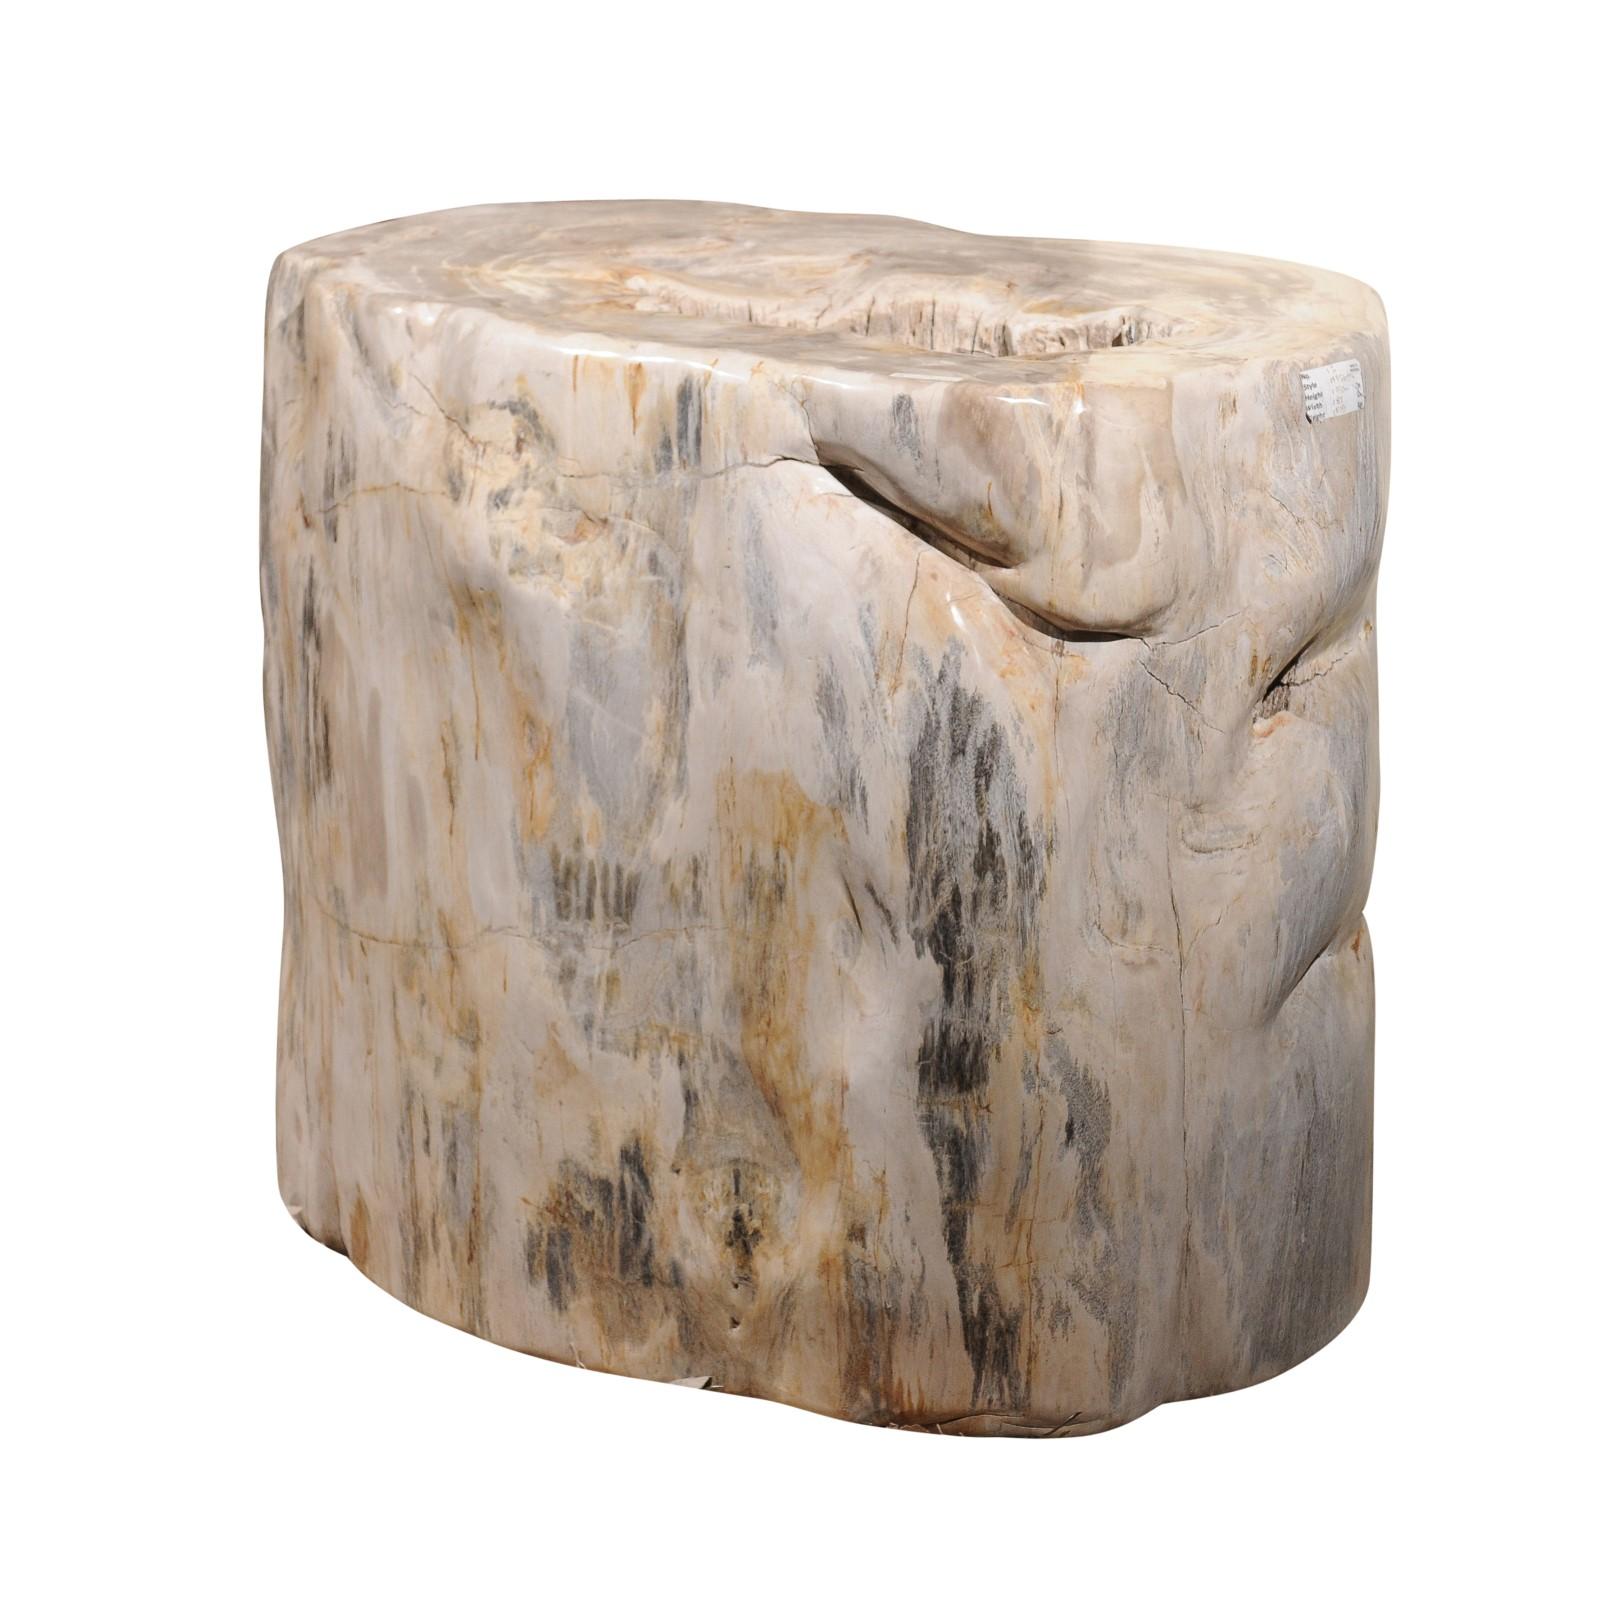 A Large-Sized Petrified Wood Pedestal Base, Beautiful Base for Glass Top Table!